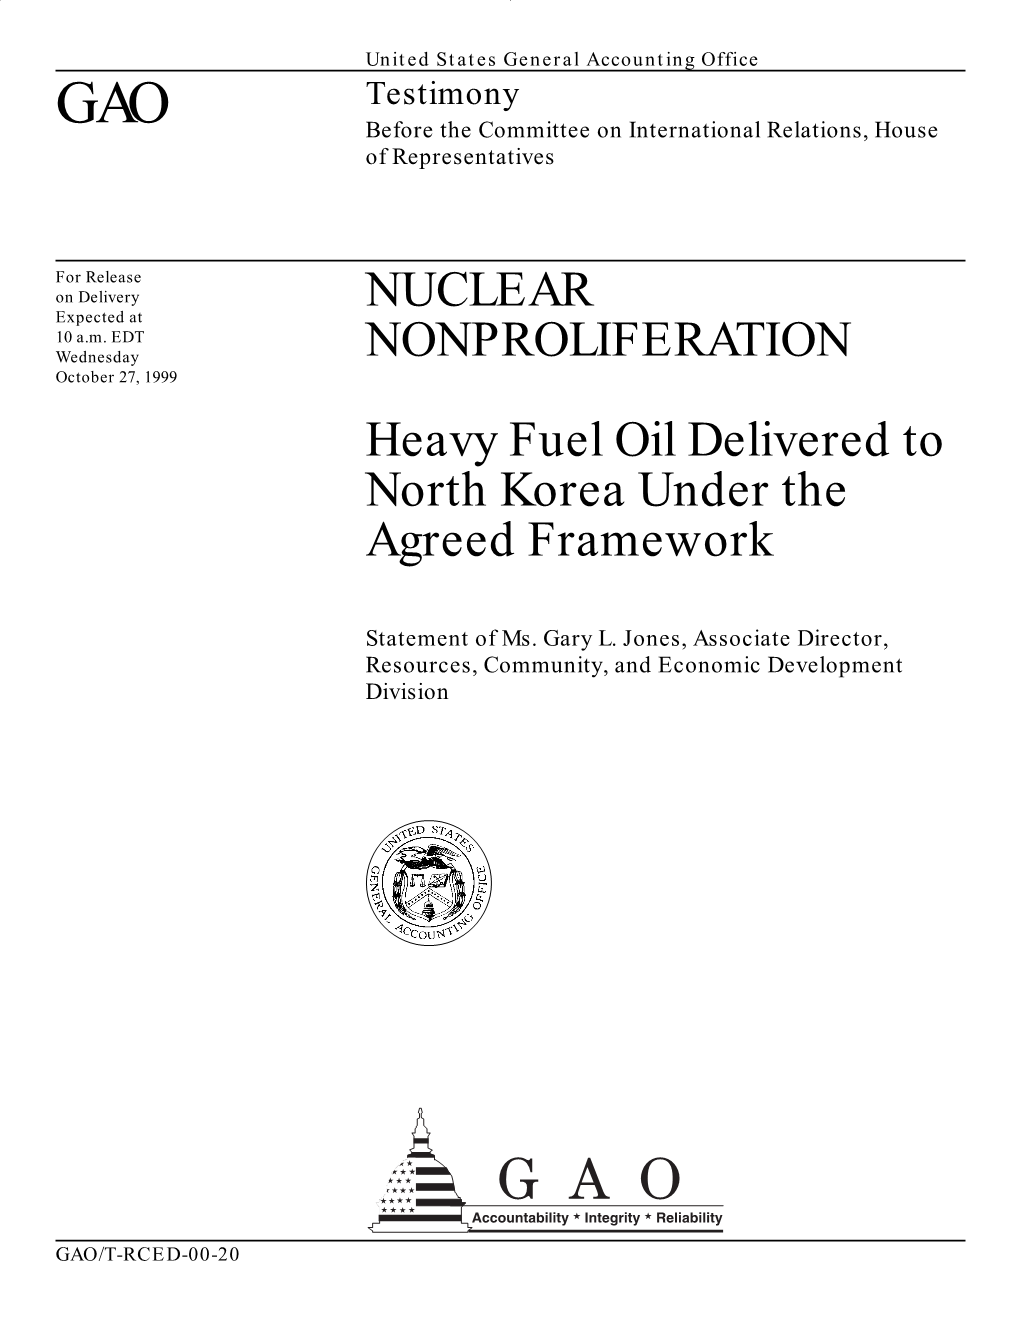 NUCLEAR NONPROLIFERATION: Heavy Fuel Oil